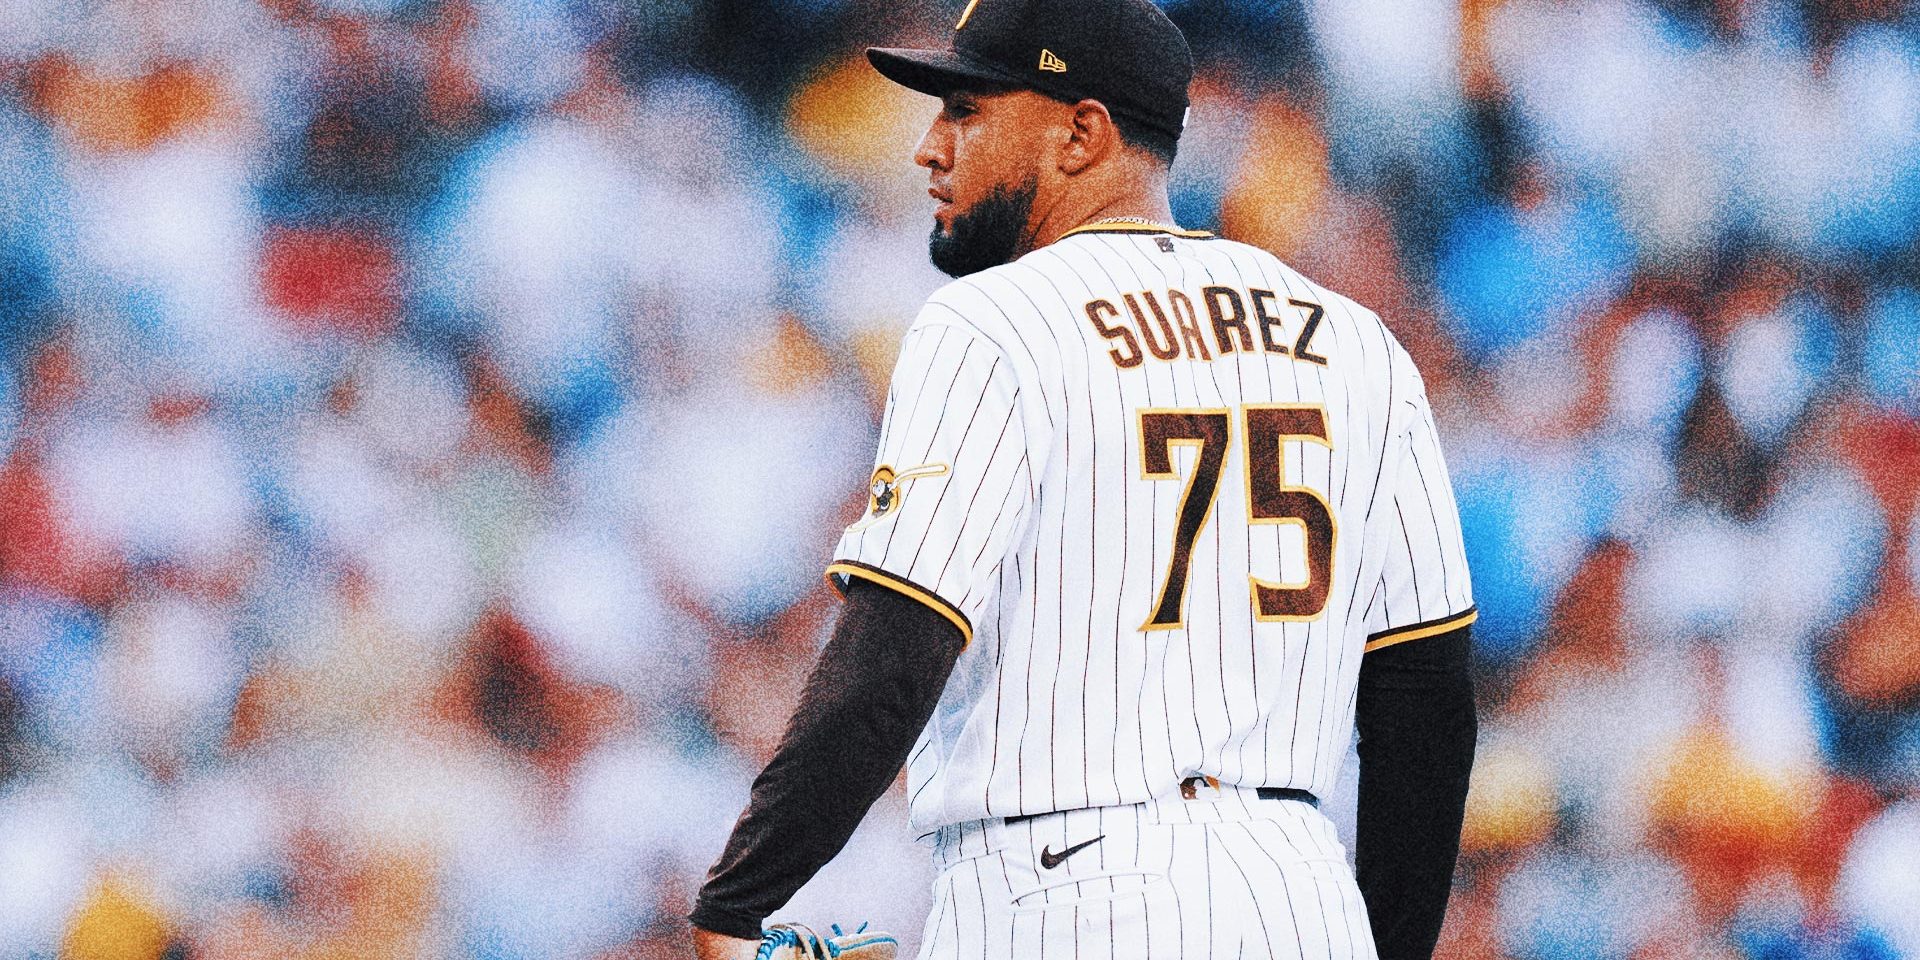 Padres reliever Robert Suarez ejected for sticky stuff before throwing a pitch vs. Marlins